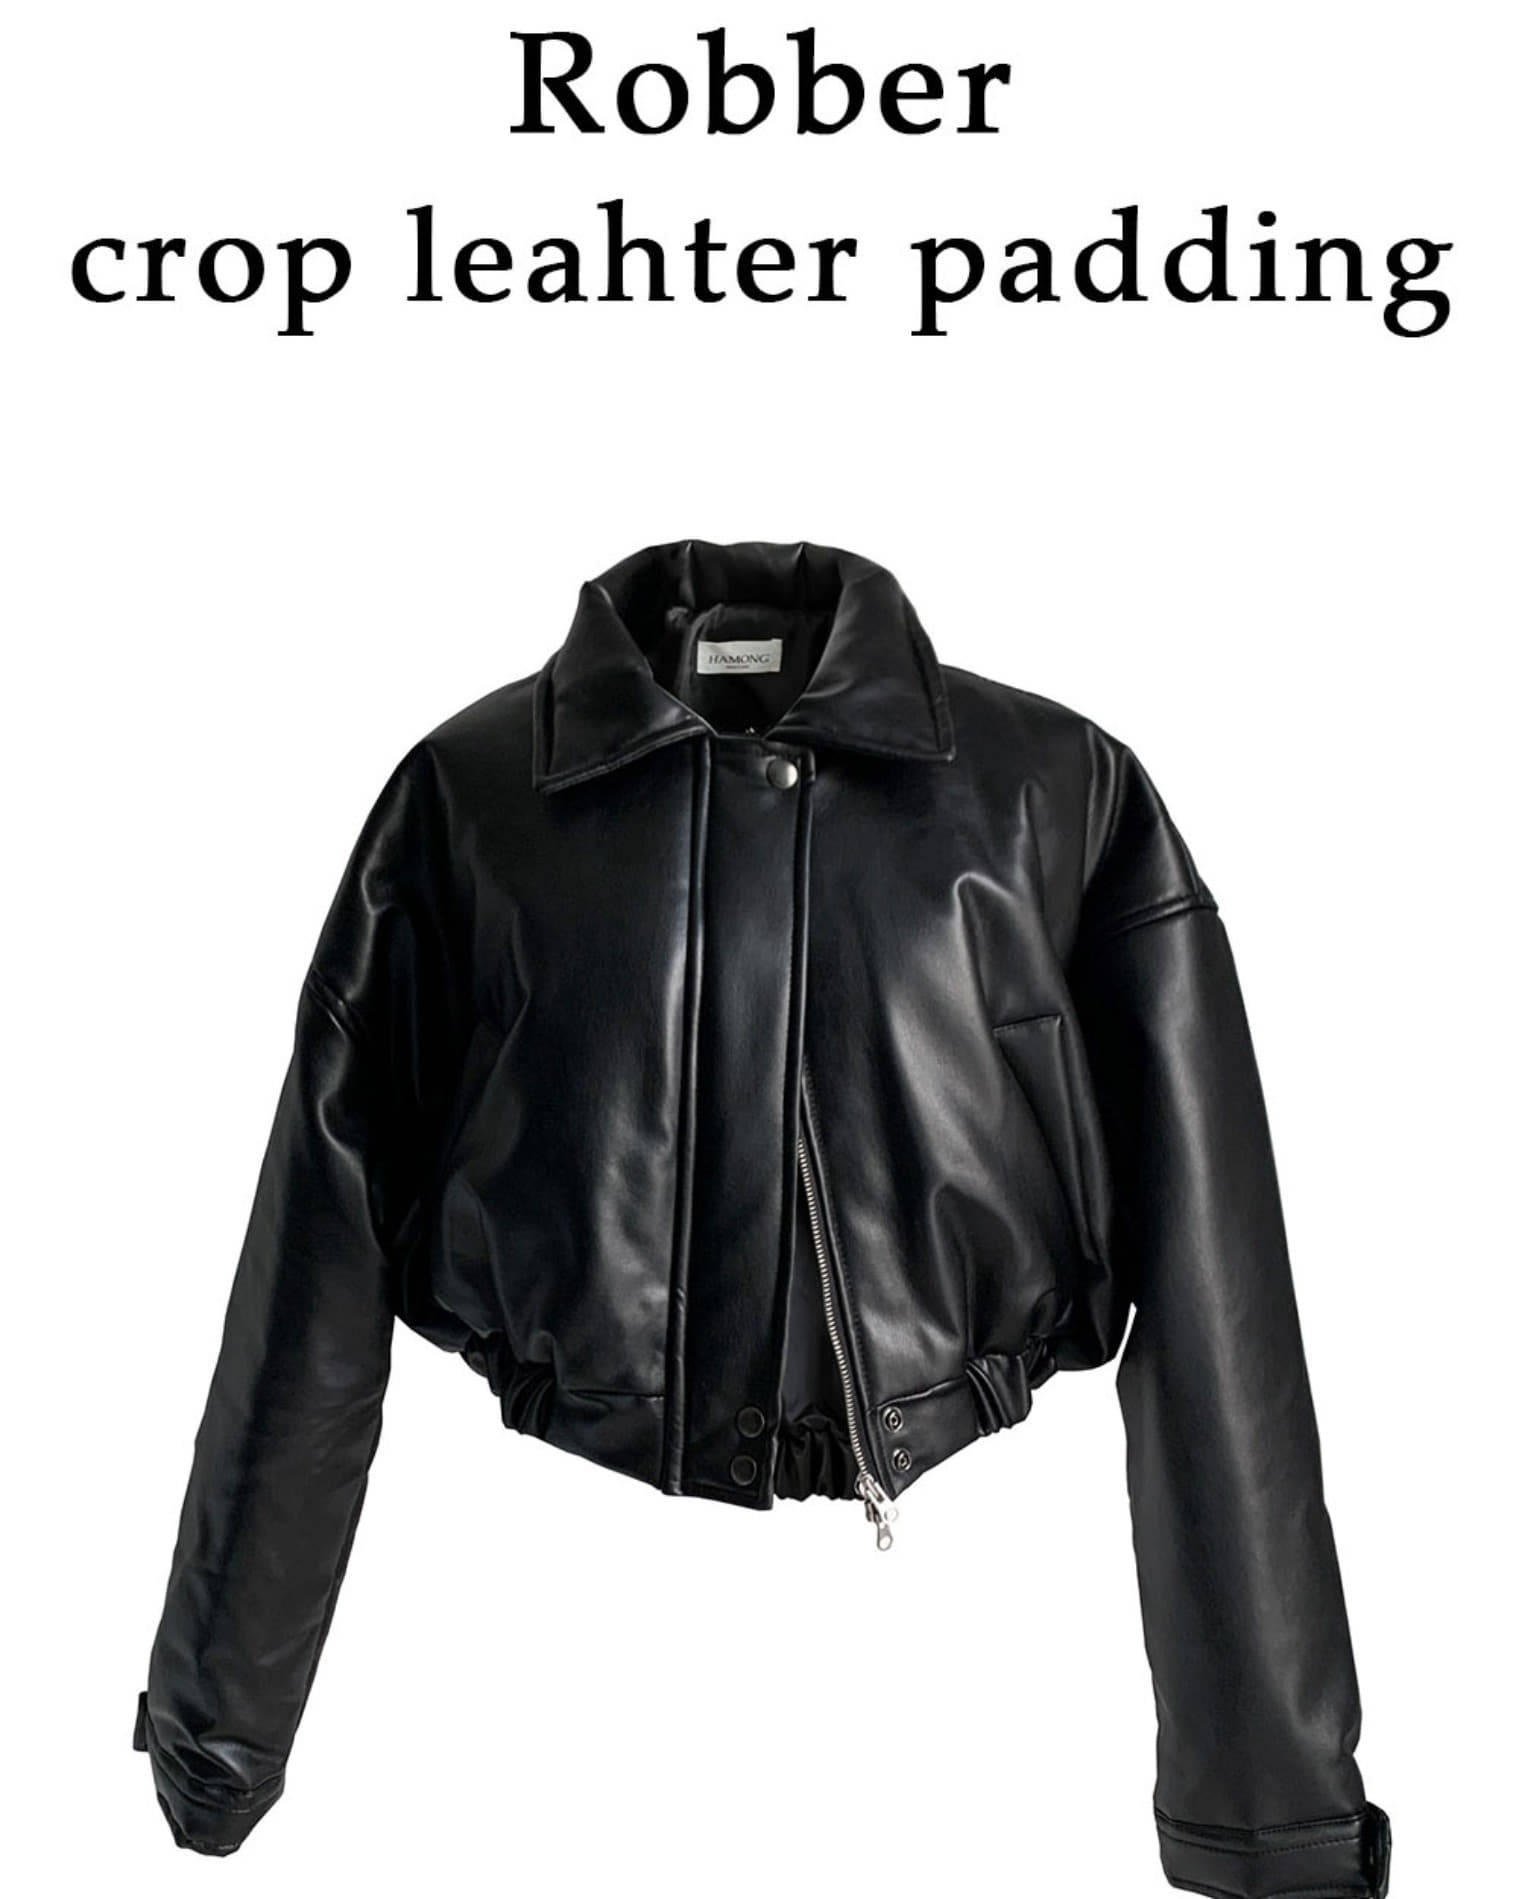 [MADE] Robber crop leather padding